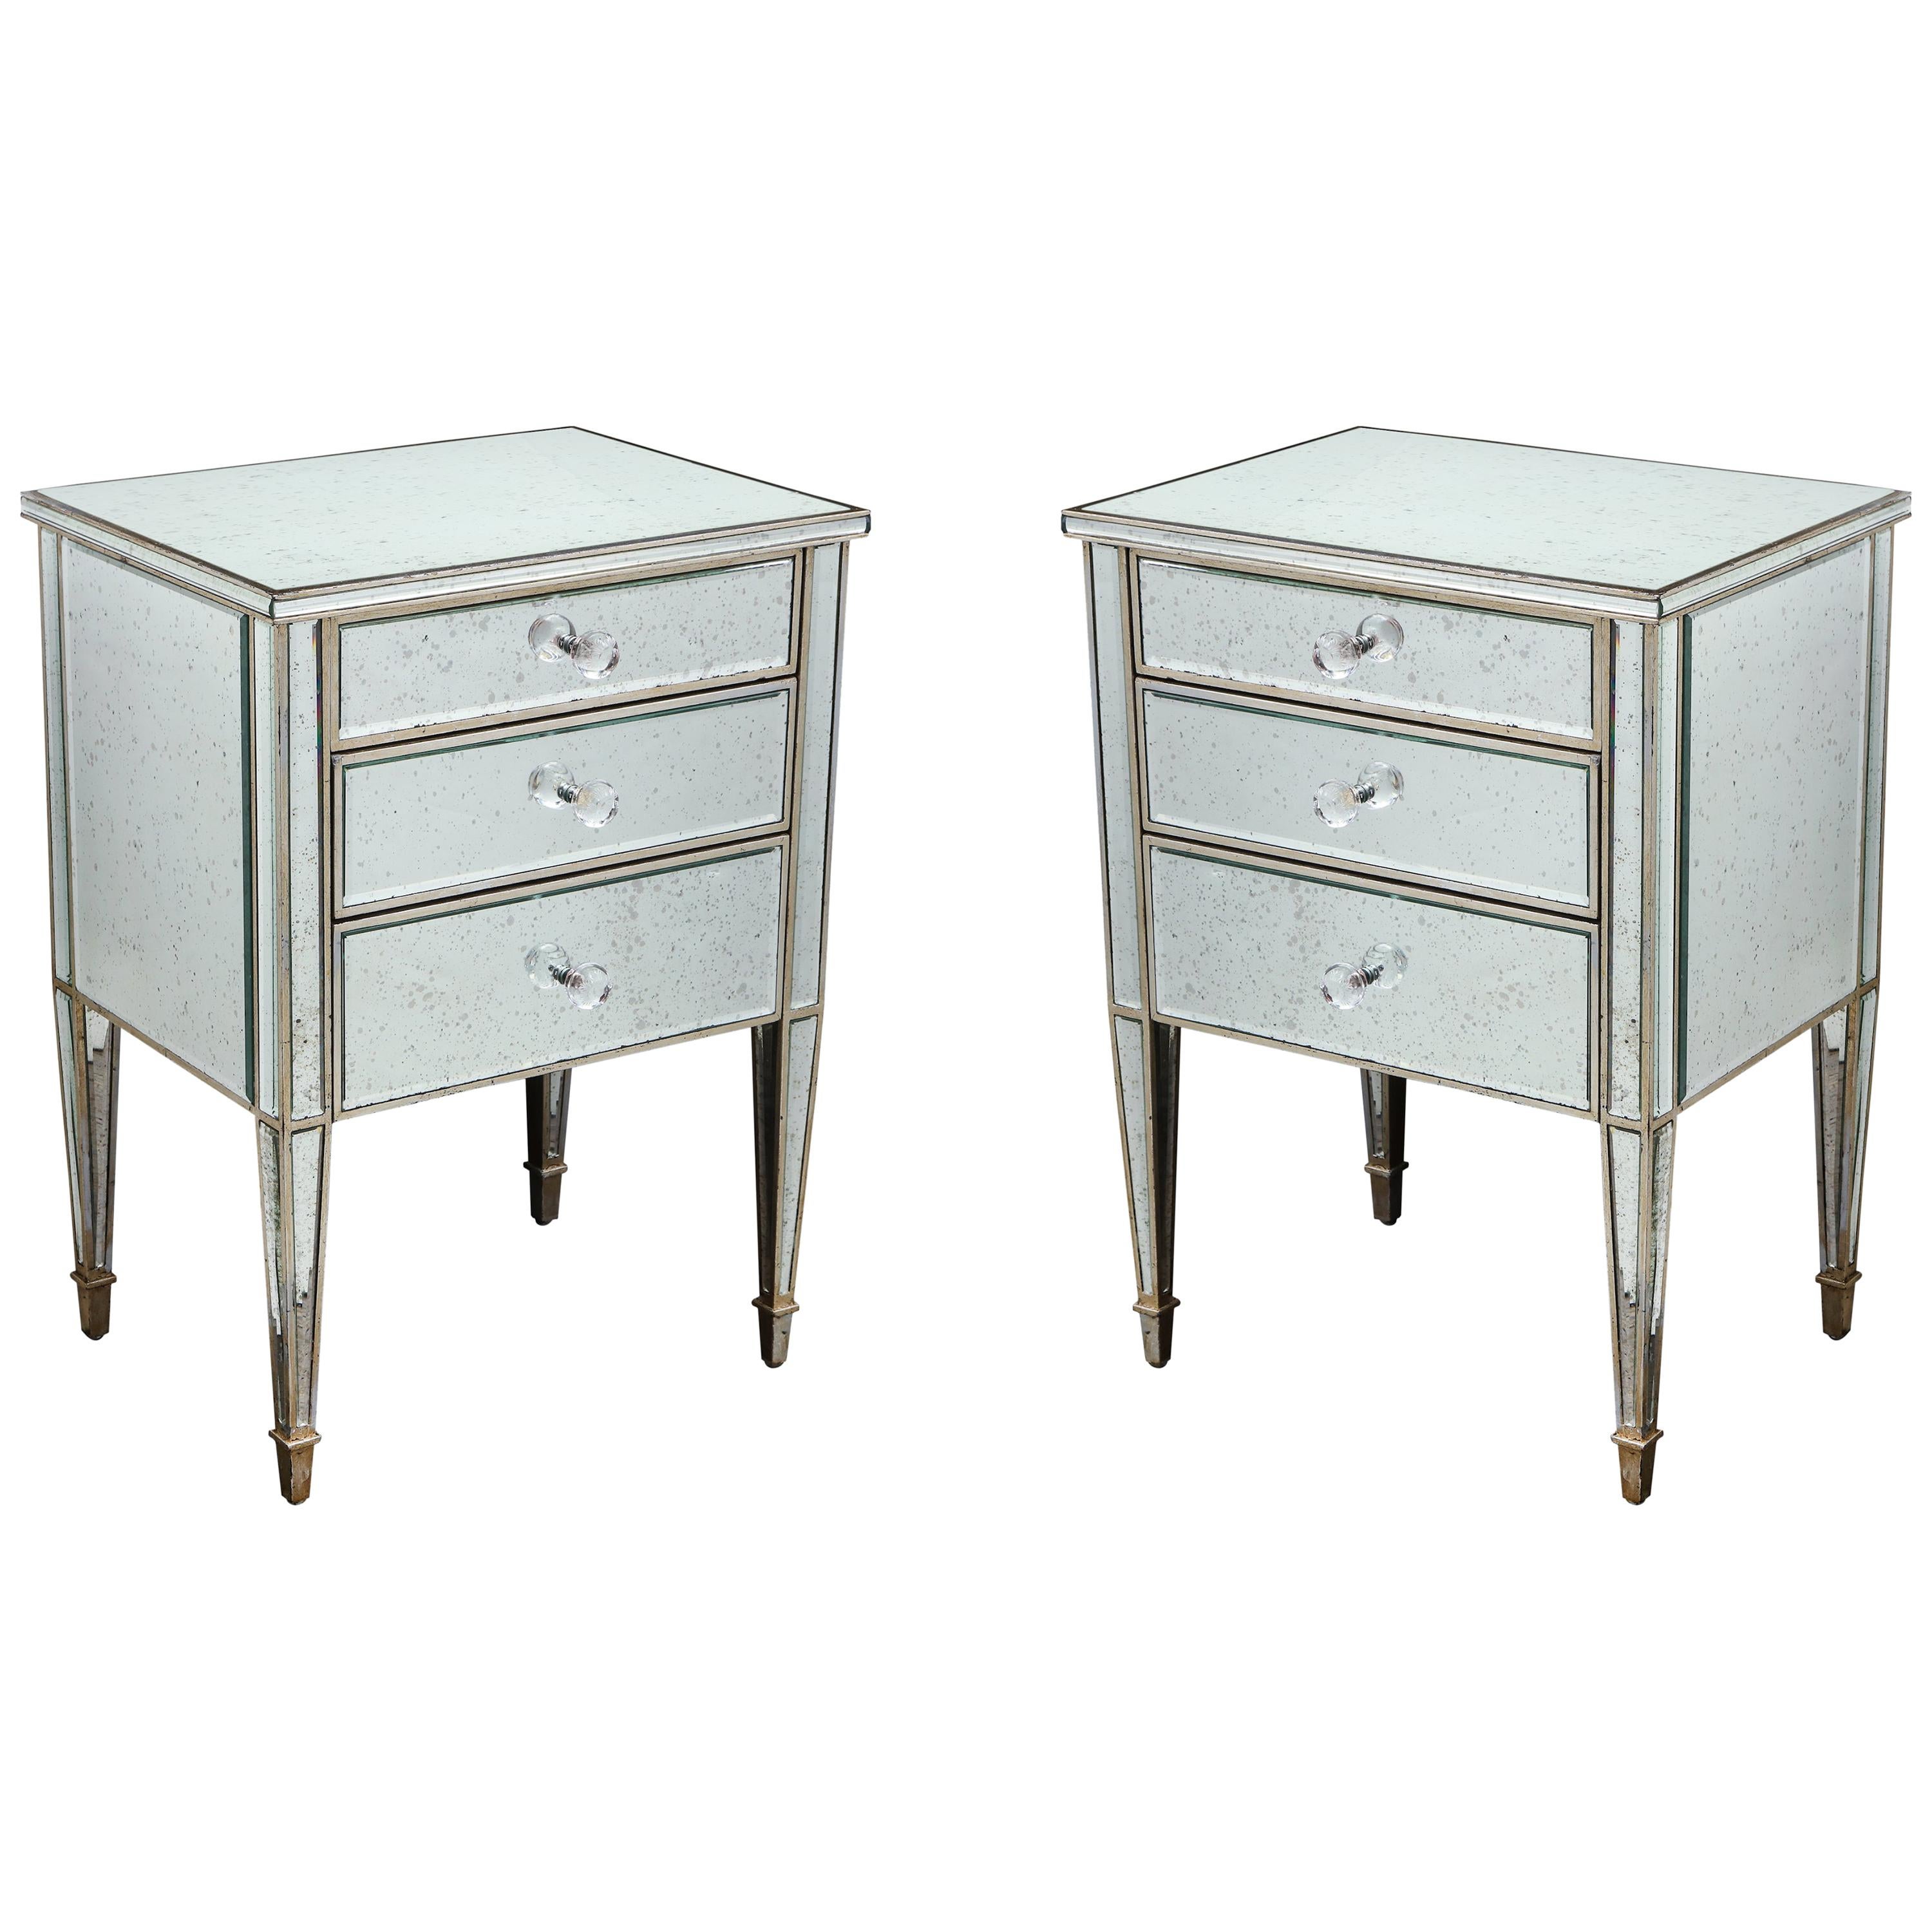 Pair of Antique Mirrored Nightstands with Silver Gilt Trim